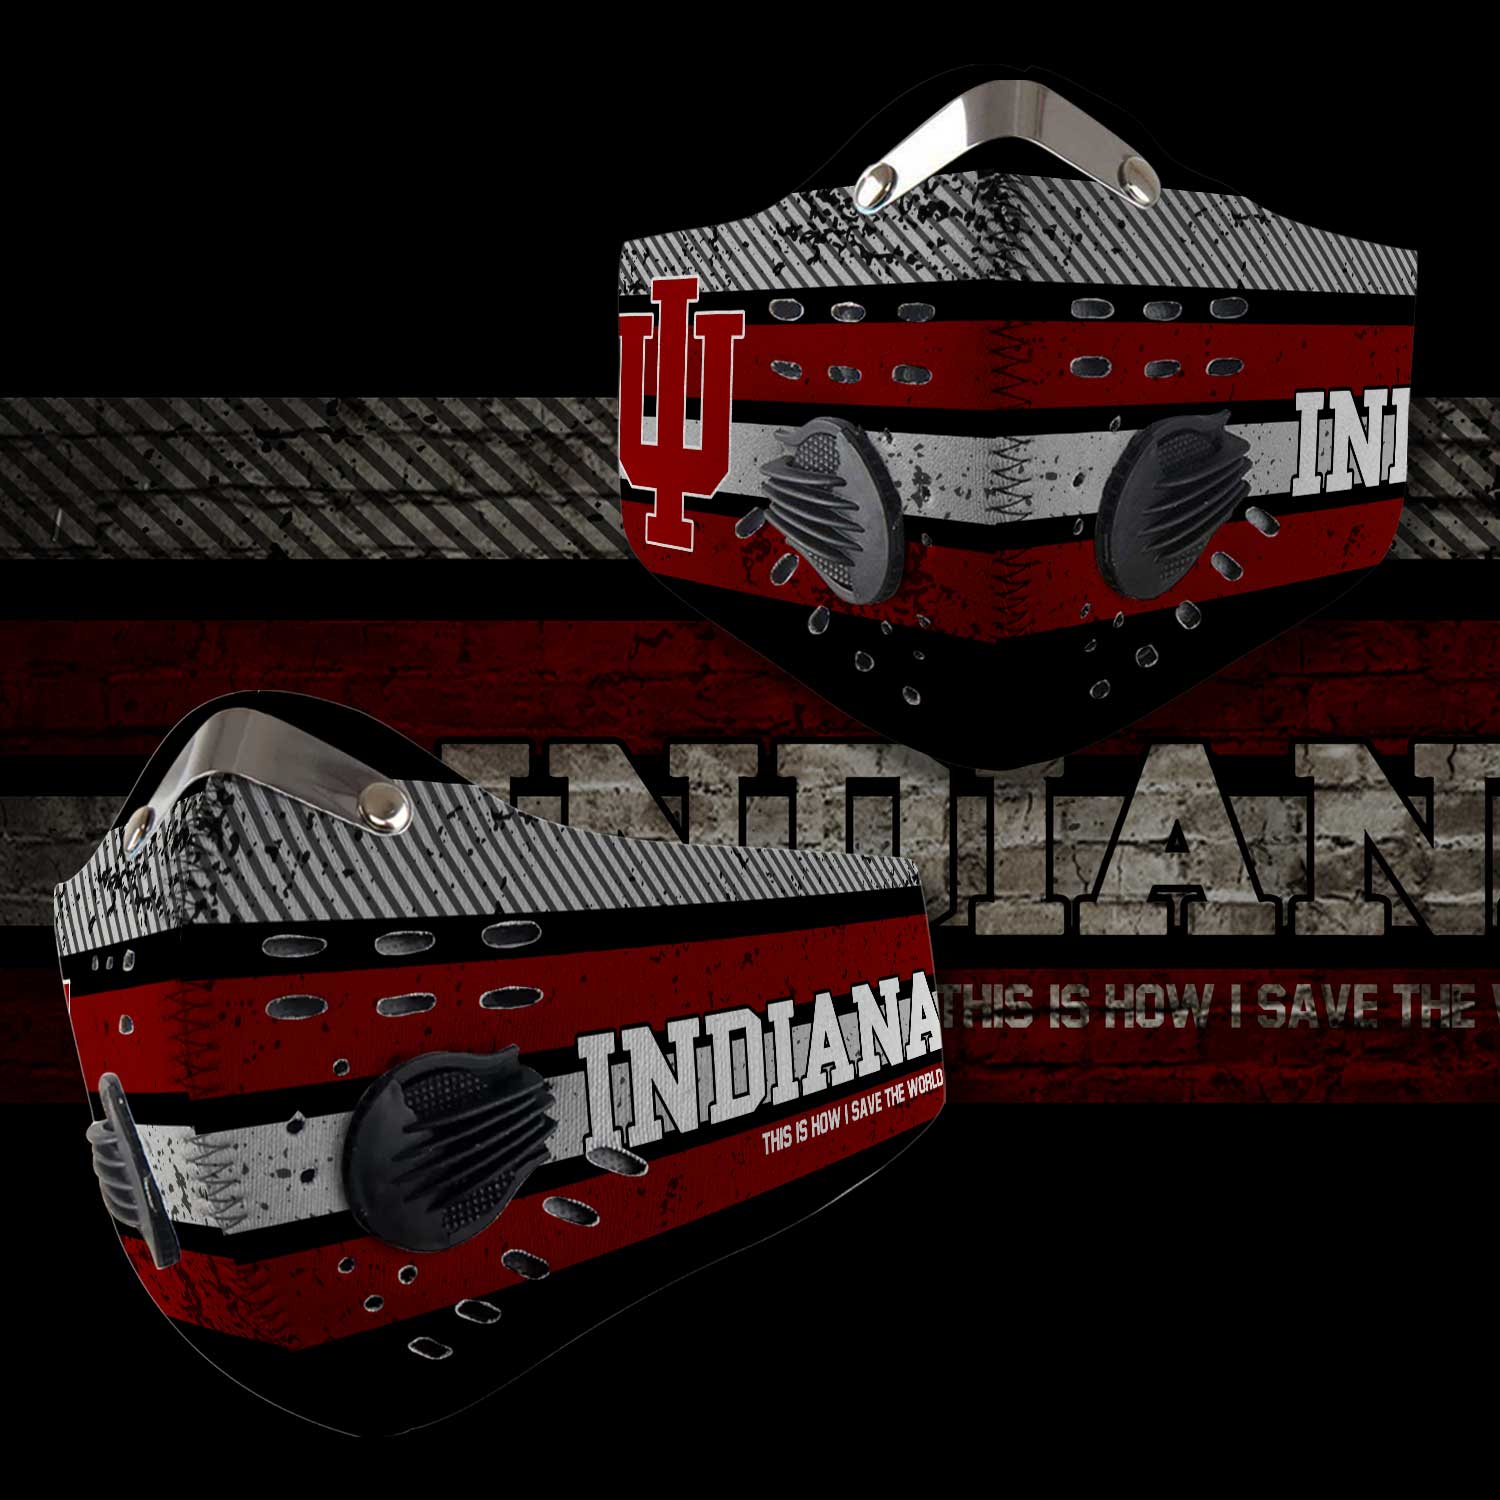 Indiana hoosiers this is how i save the world carbon filter face mask